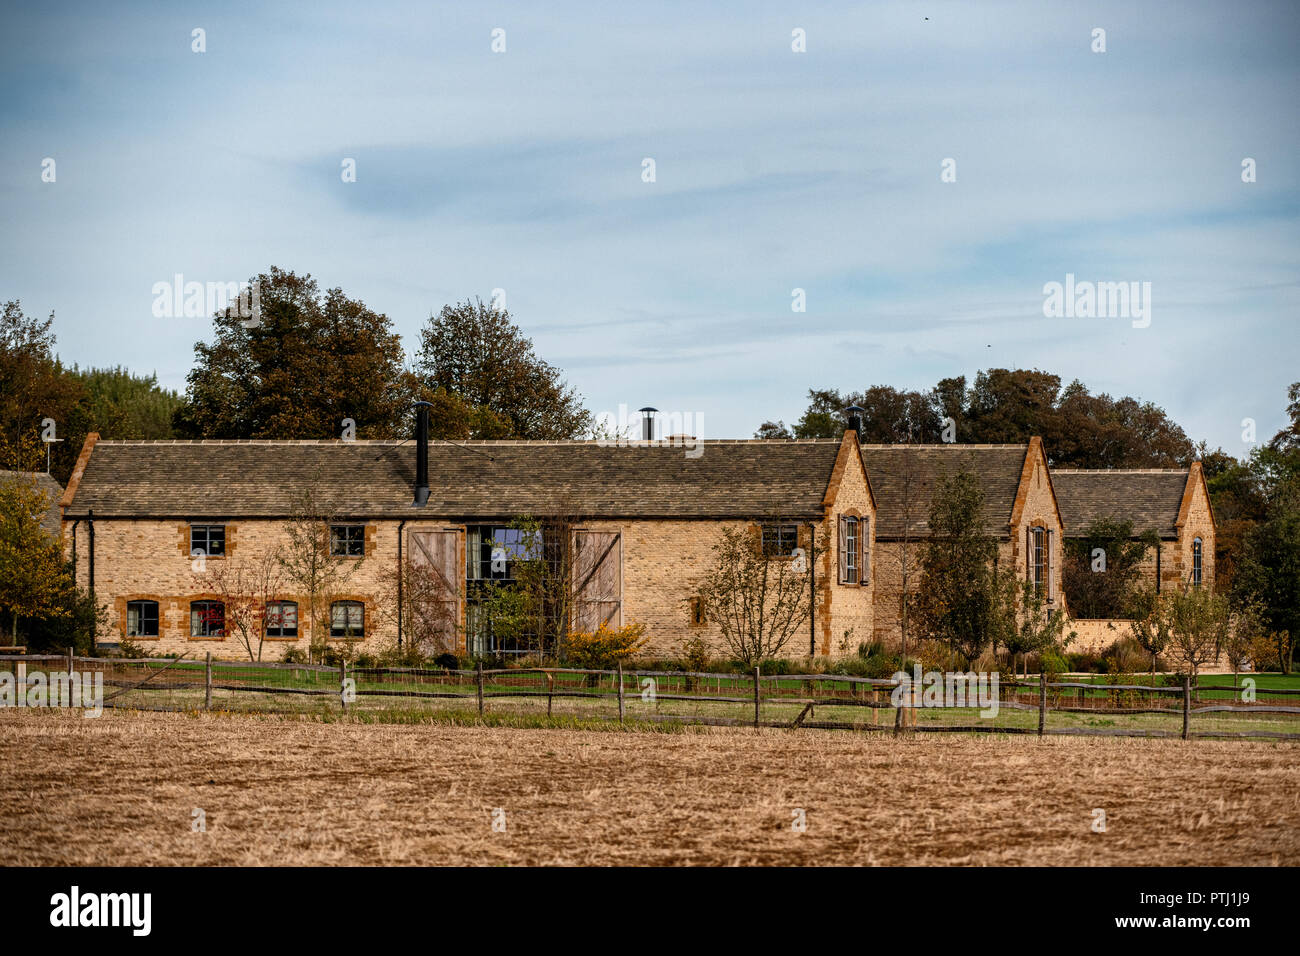 David and Victoria Beckham's Cotswolds estate near Great Tew in